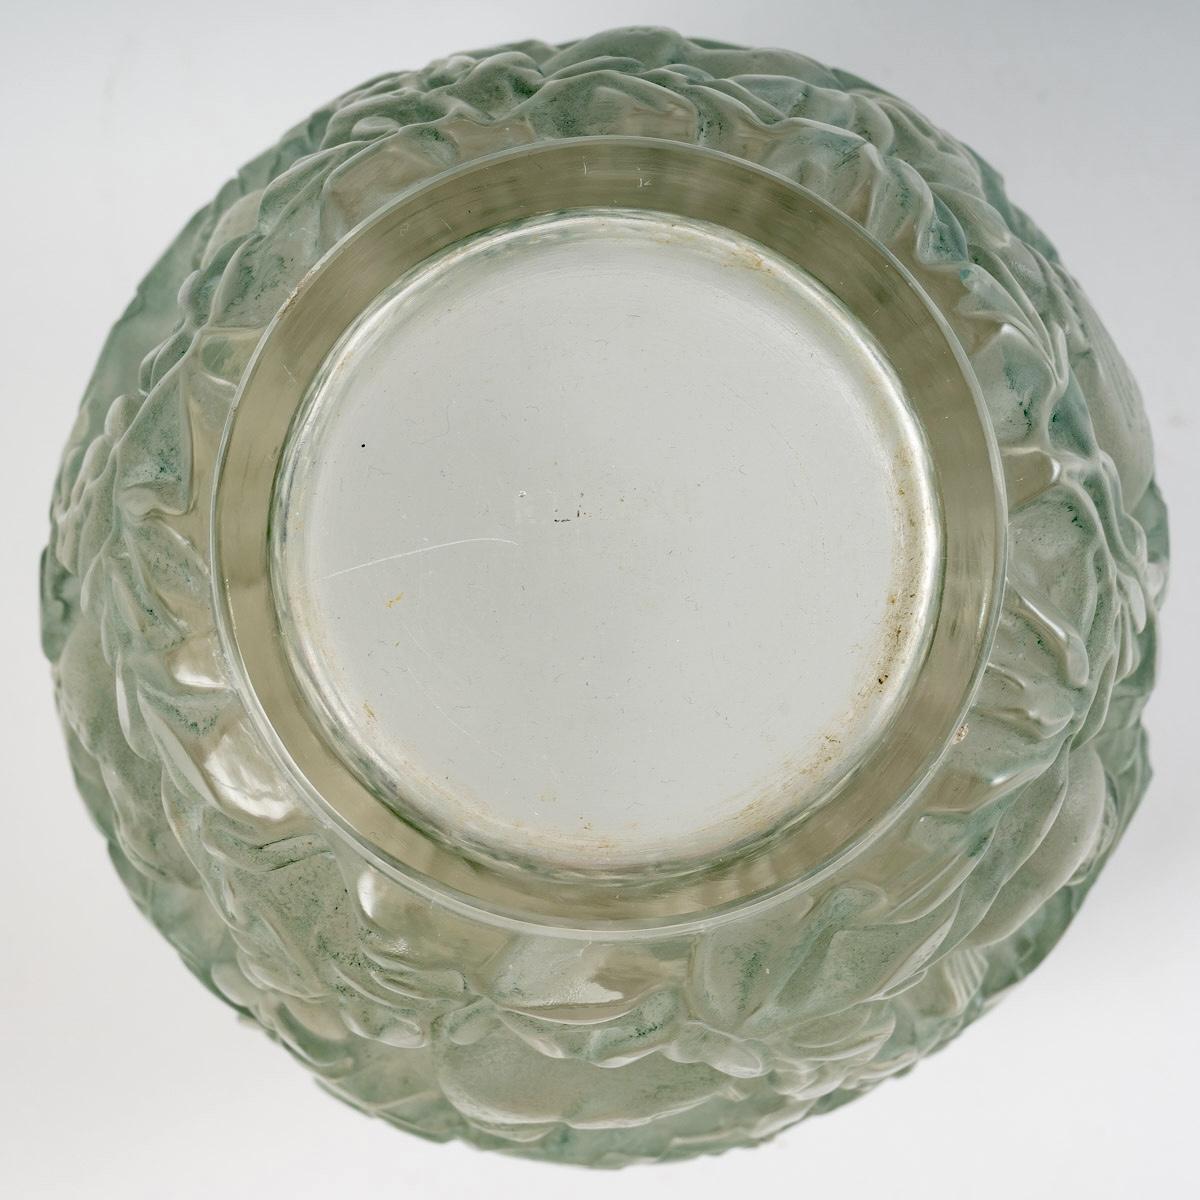 Molded 1939 René Lalique Bagatelle Vase in Frosted Glass with Green Patina